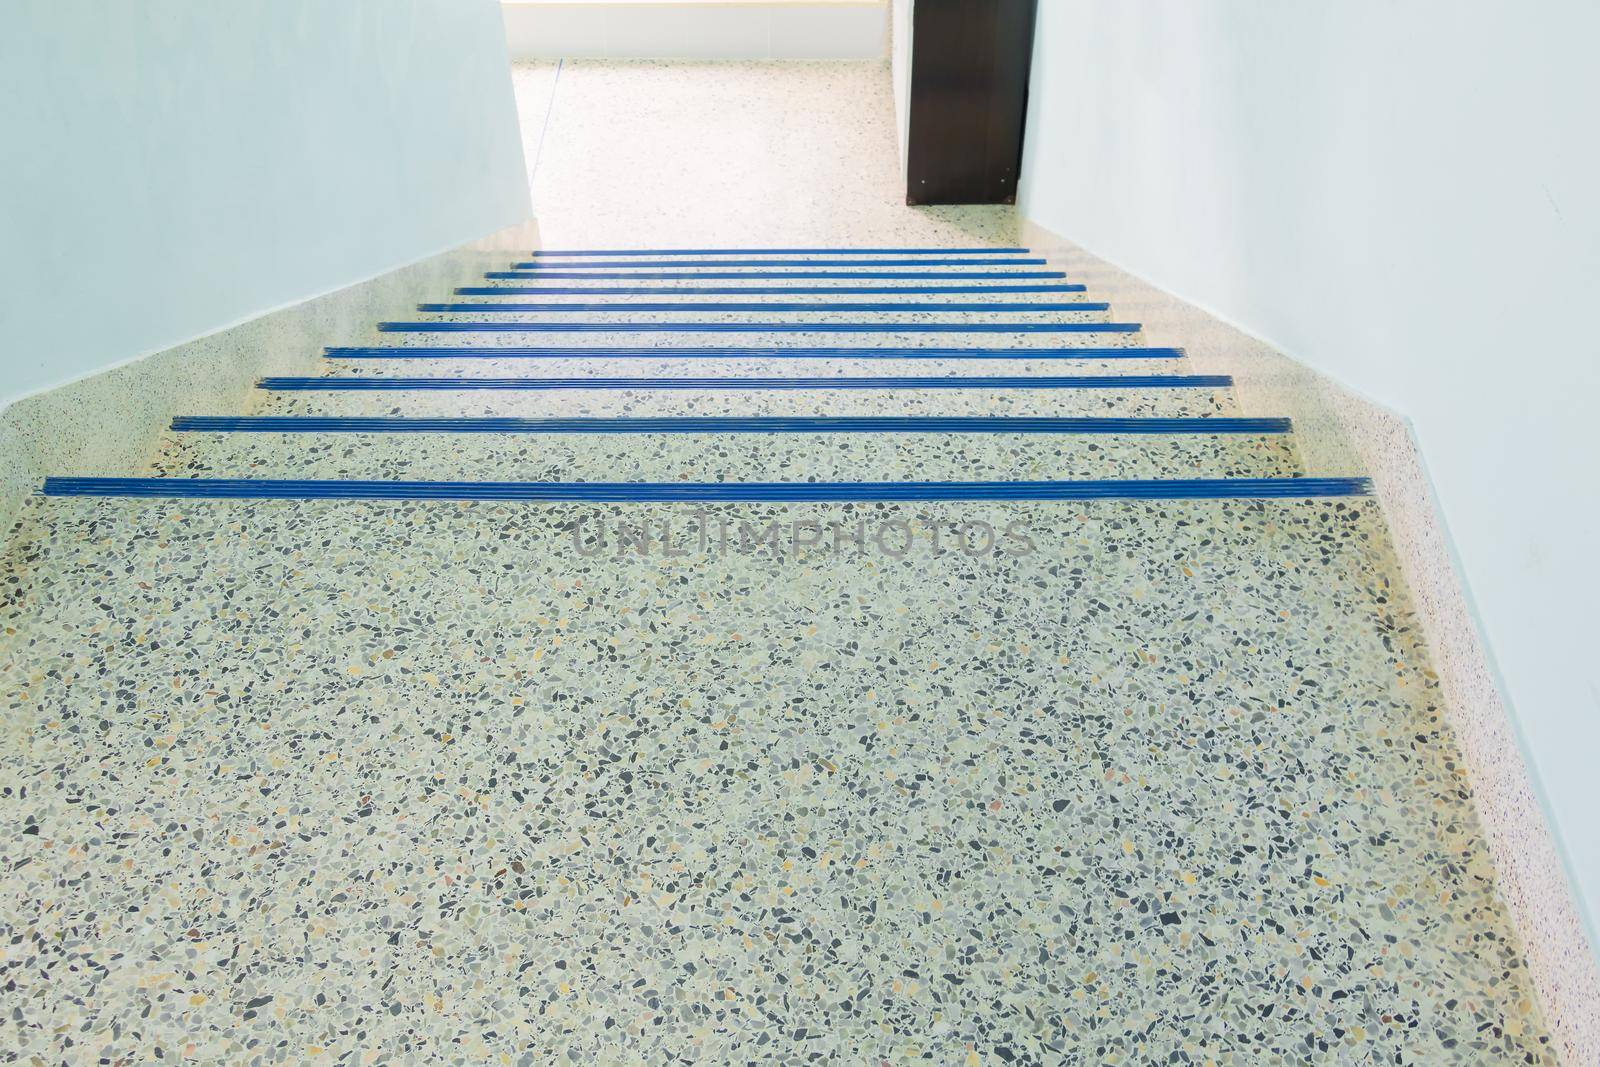 stairs walkway down terrazzo floor. select focus with shallow depth of field by pramot